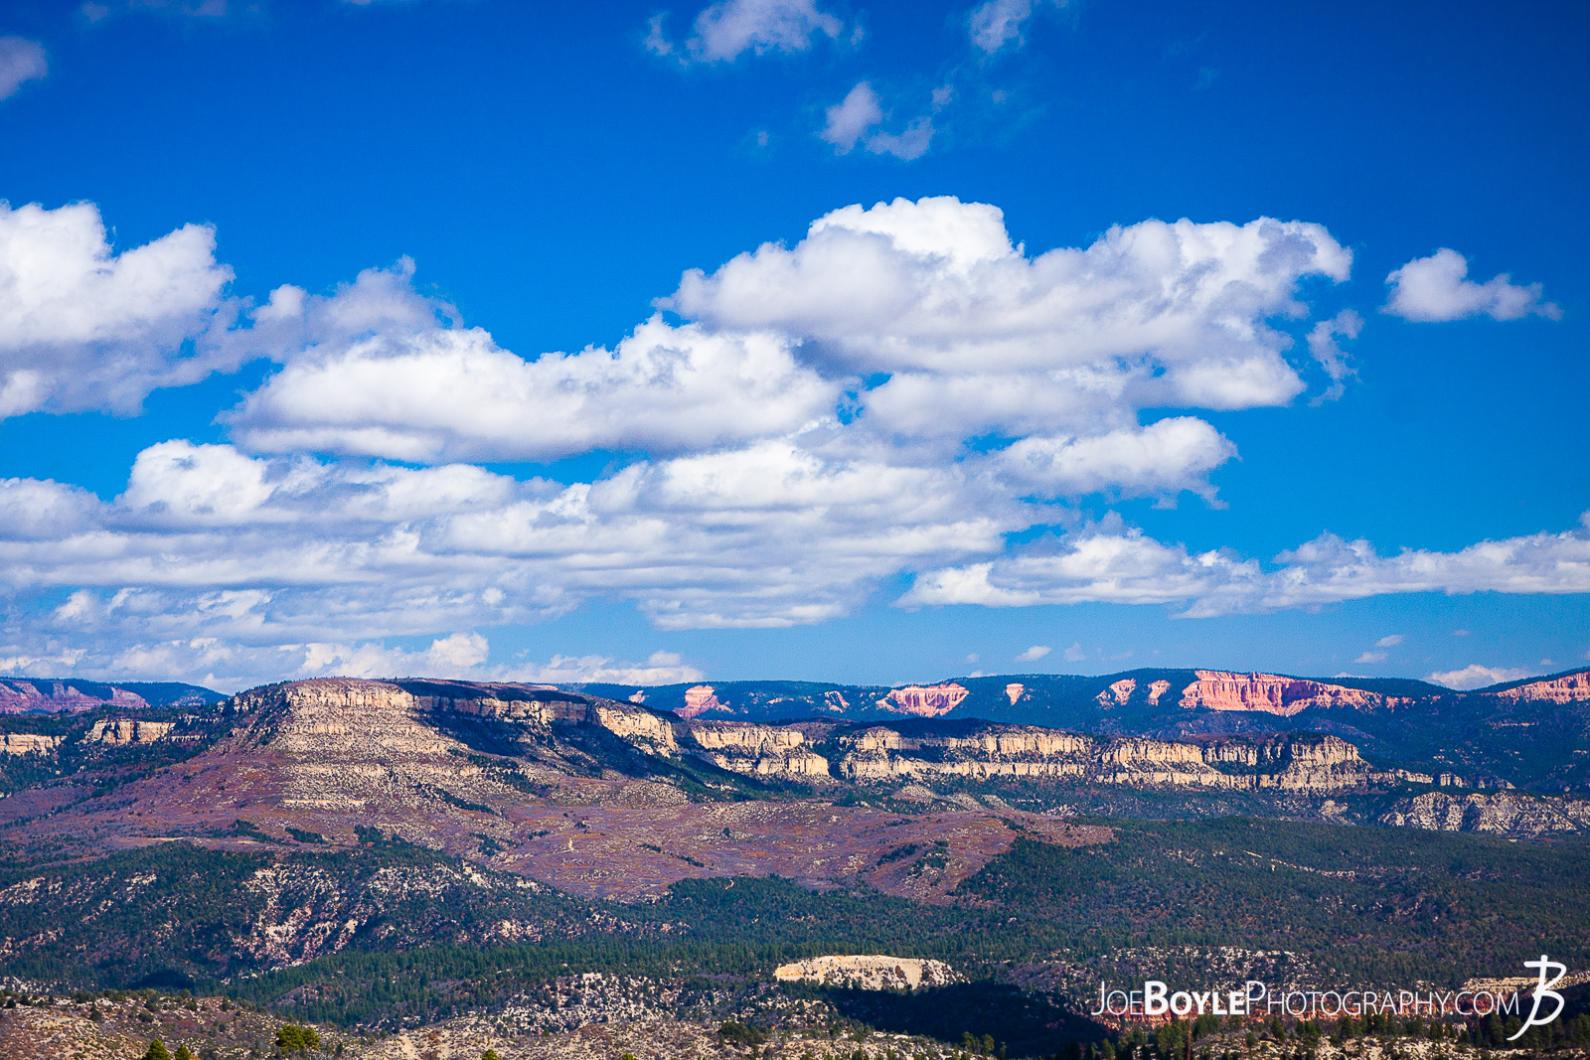 This is a photo of a beautiful blue sky, awesome clouds & canyons in Zion National Park.